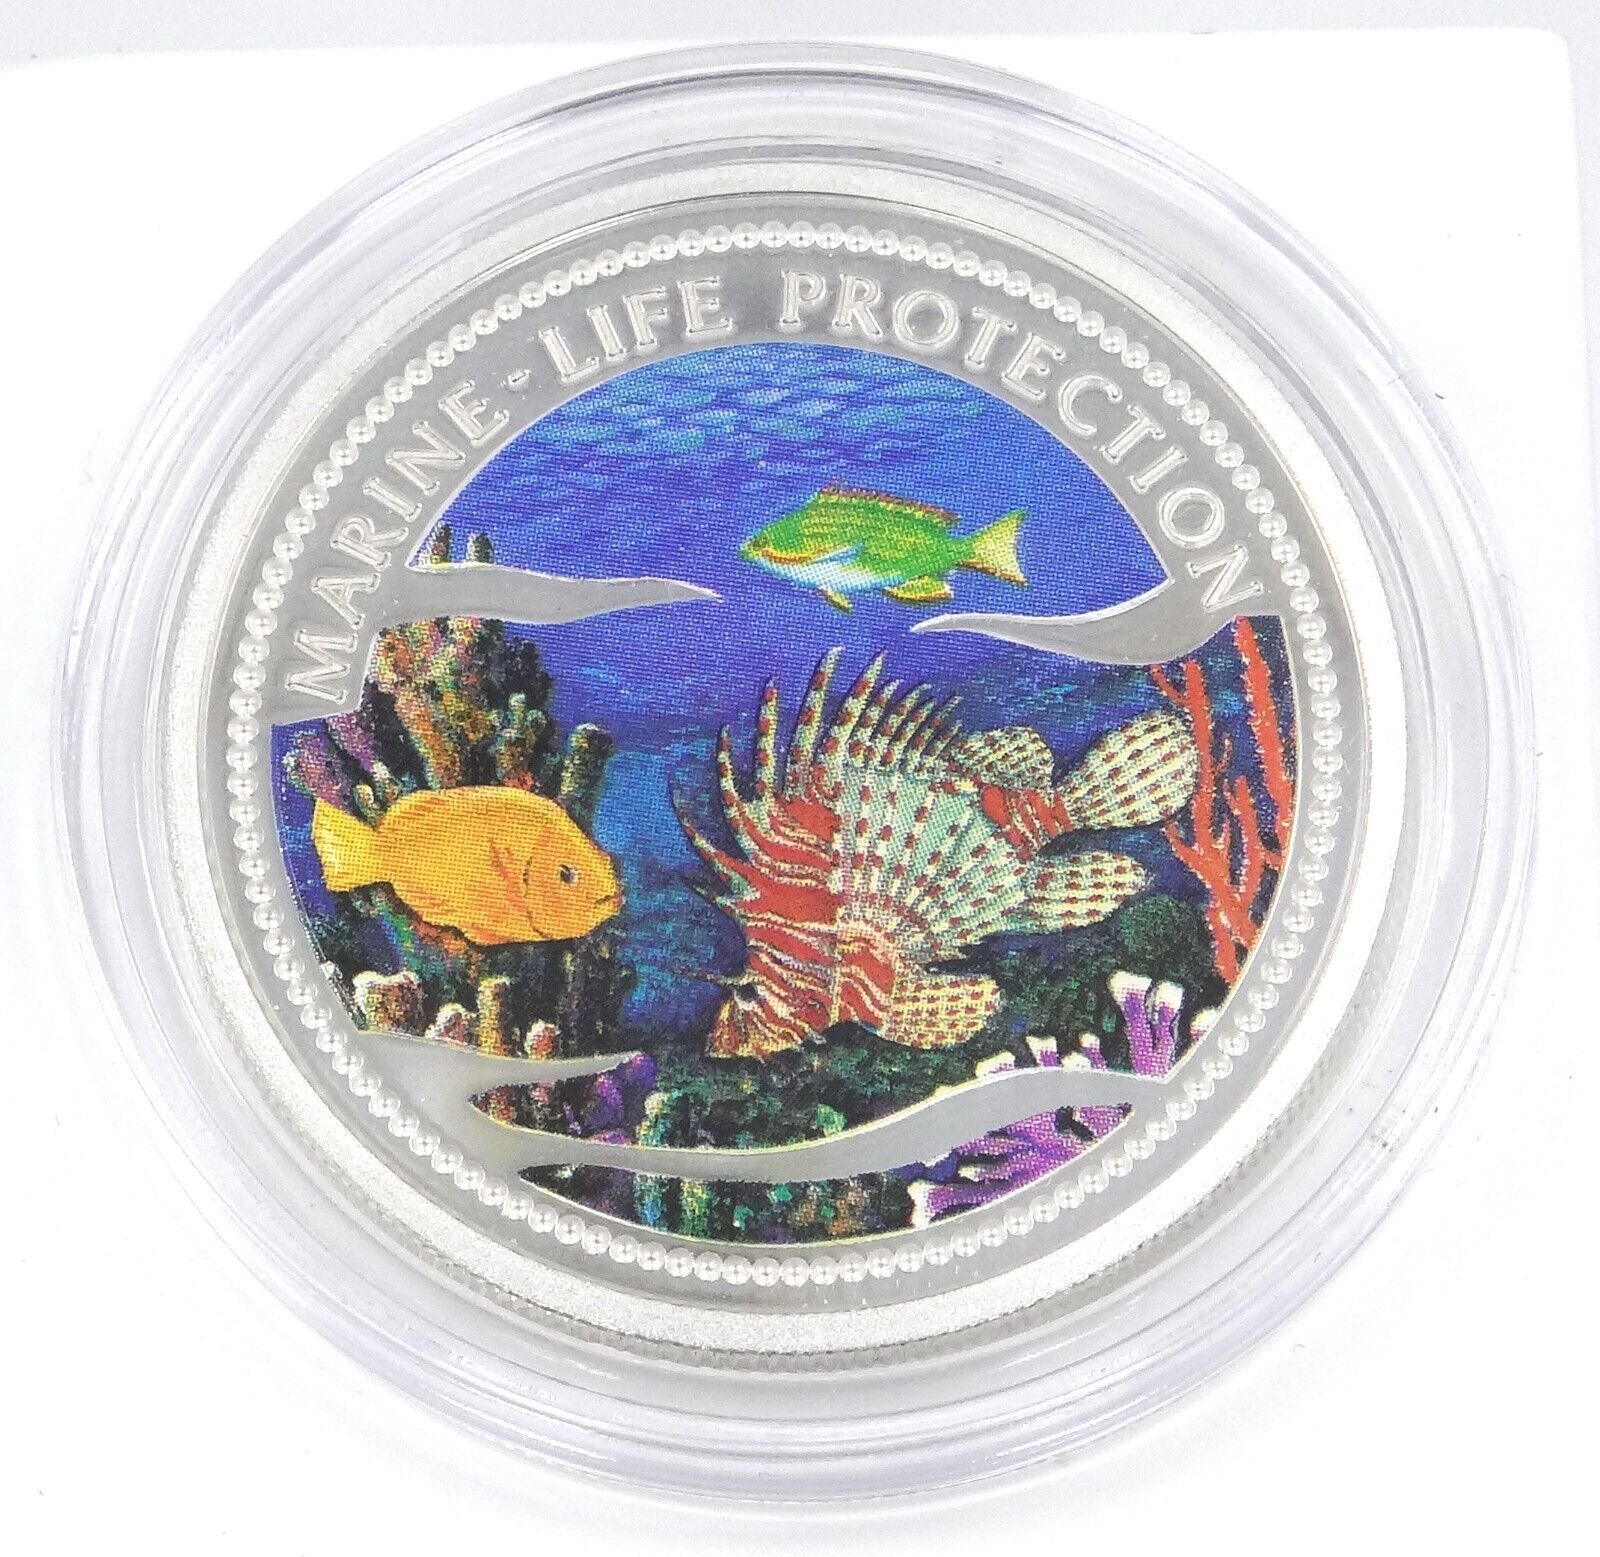 25g Silver Coin 2000 $5 Palau Color Proof Marine Life Protection